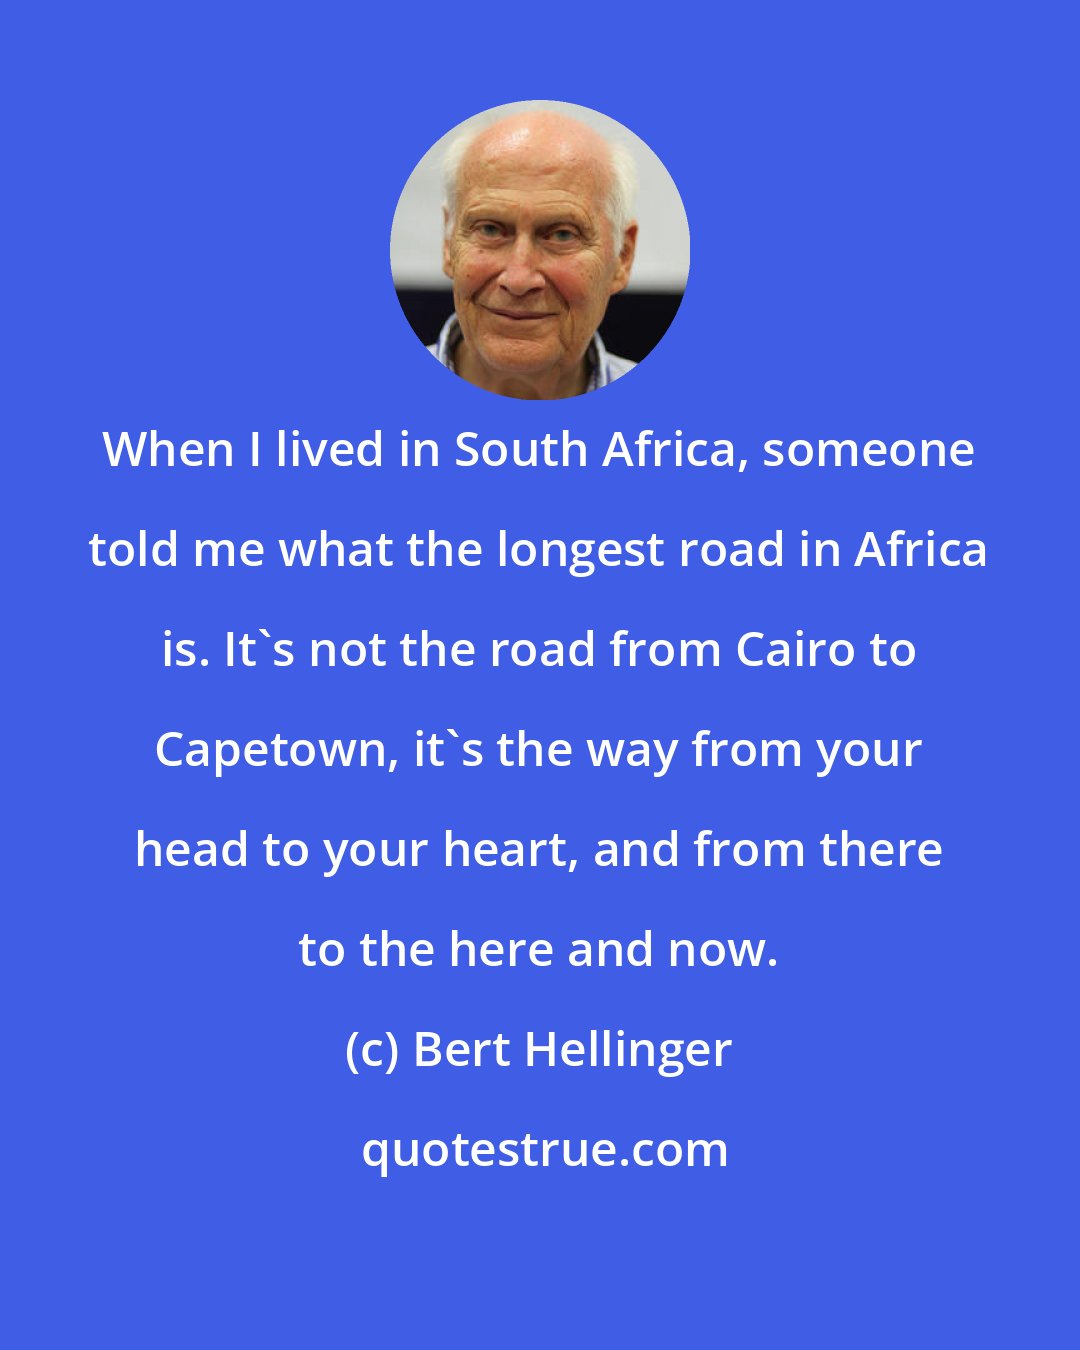 Bert Hellinger: When I lived in South Africa, someone told me what the longest road in Africa is. It's not the road from Cairo to Capetown, it's the way from your head to your heart, and from there to the here and now.